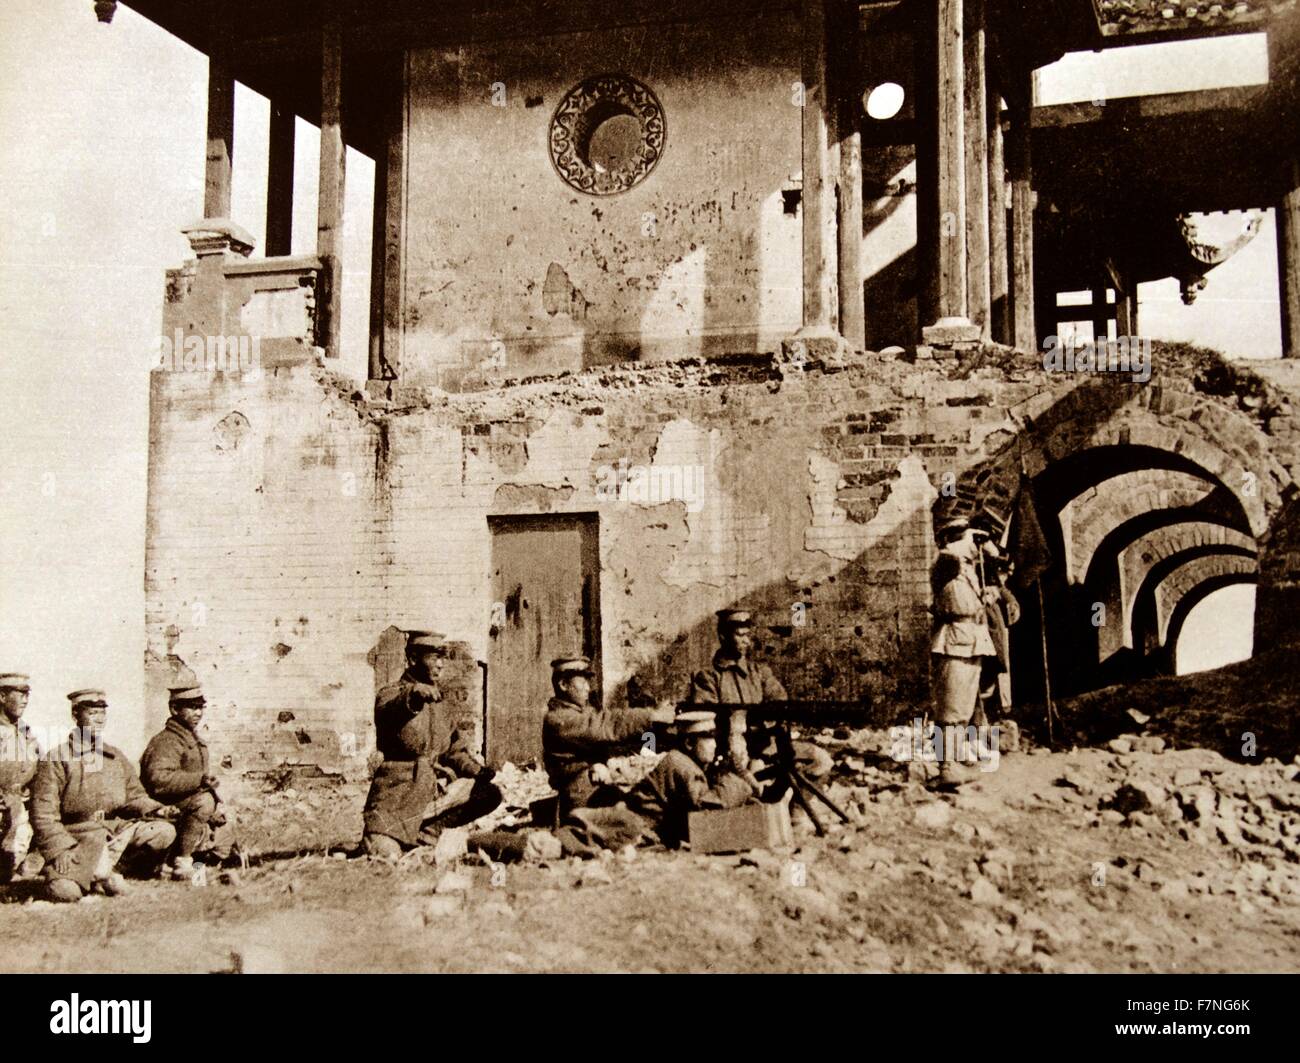 The Battle of Shanghai was the first of the twenty-two major engagements fought between the National Revolutionary Army (NRA) of the Republic of China (ROC) and the Imperial Japanese Army (IJA) of the Empire of Japan during the Second Sino-Japanese War 19 Stock Photo